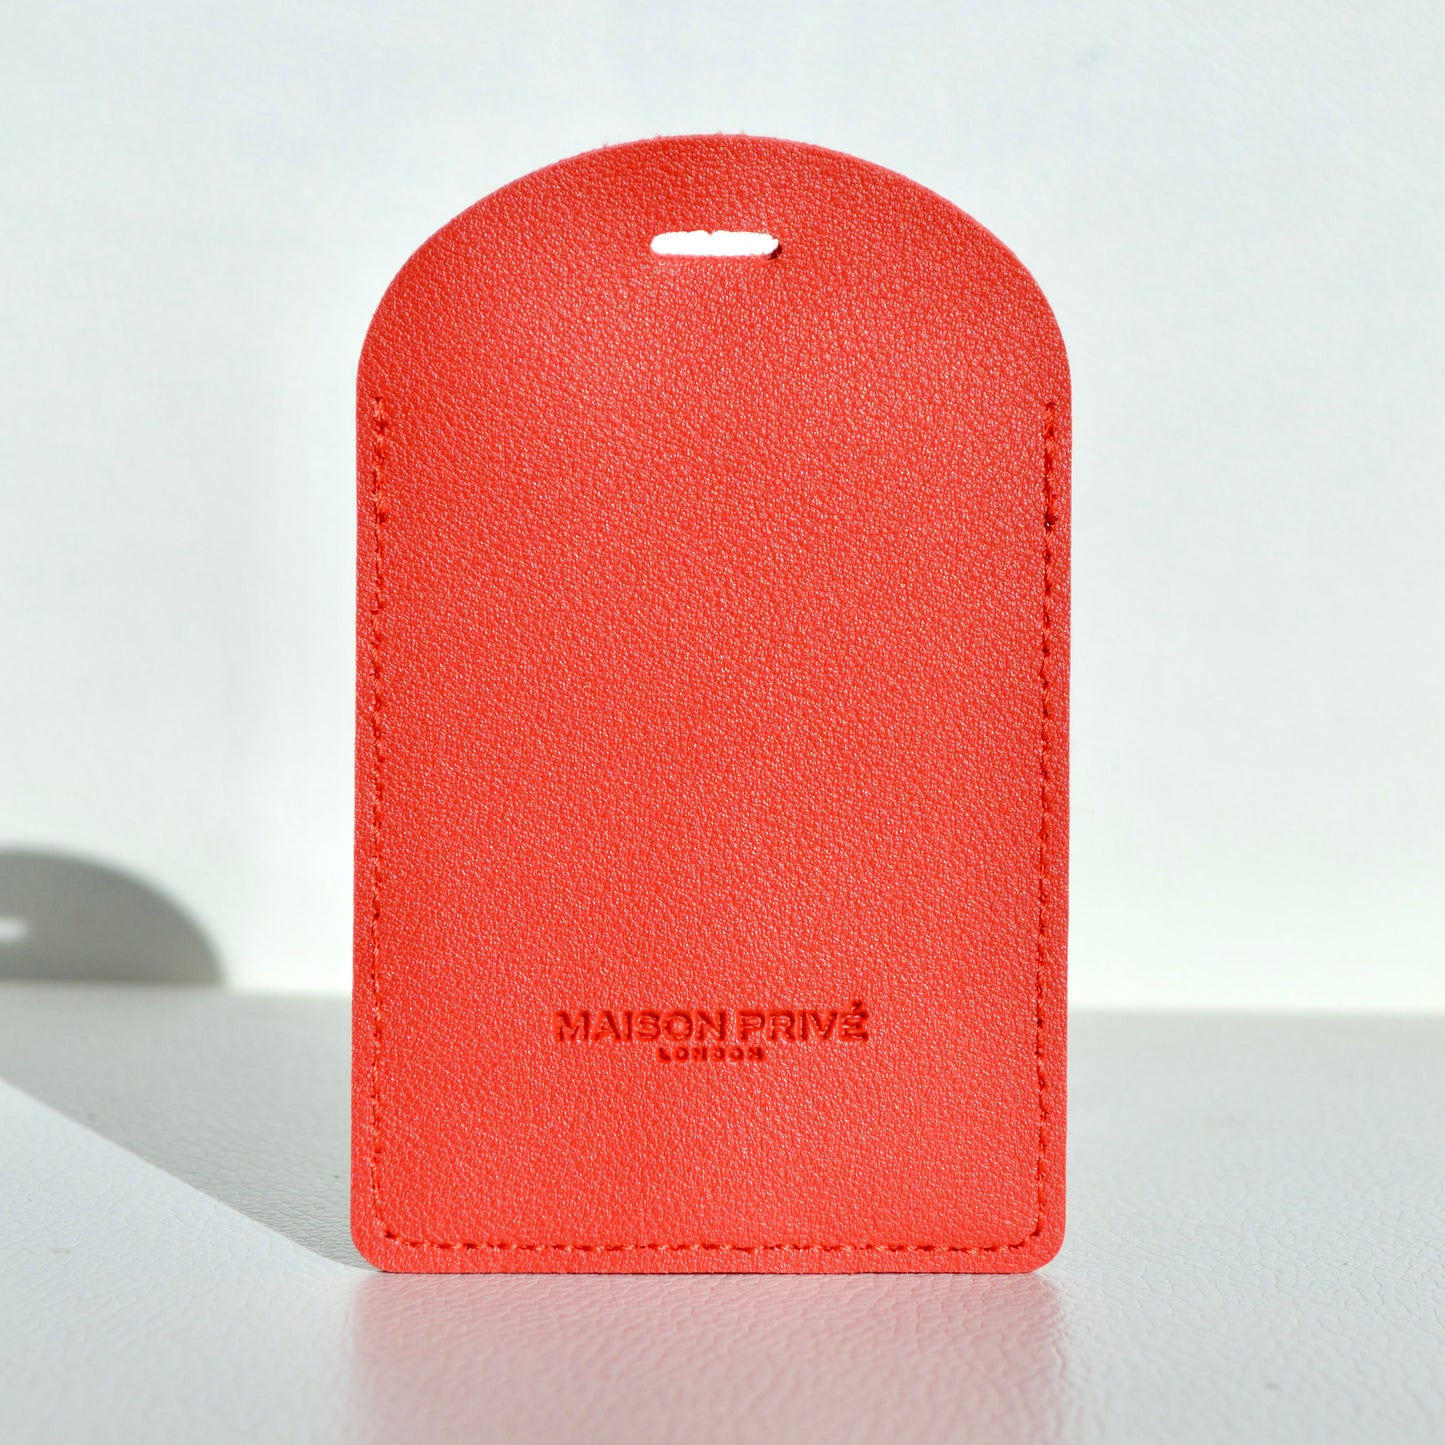 LUGGAGE TAG IN RED SAFFIANO LEATHER